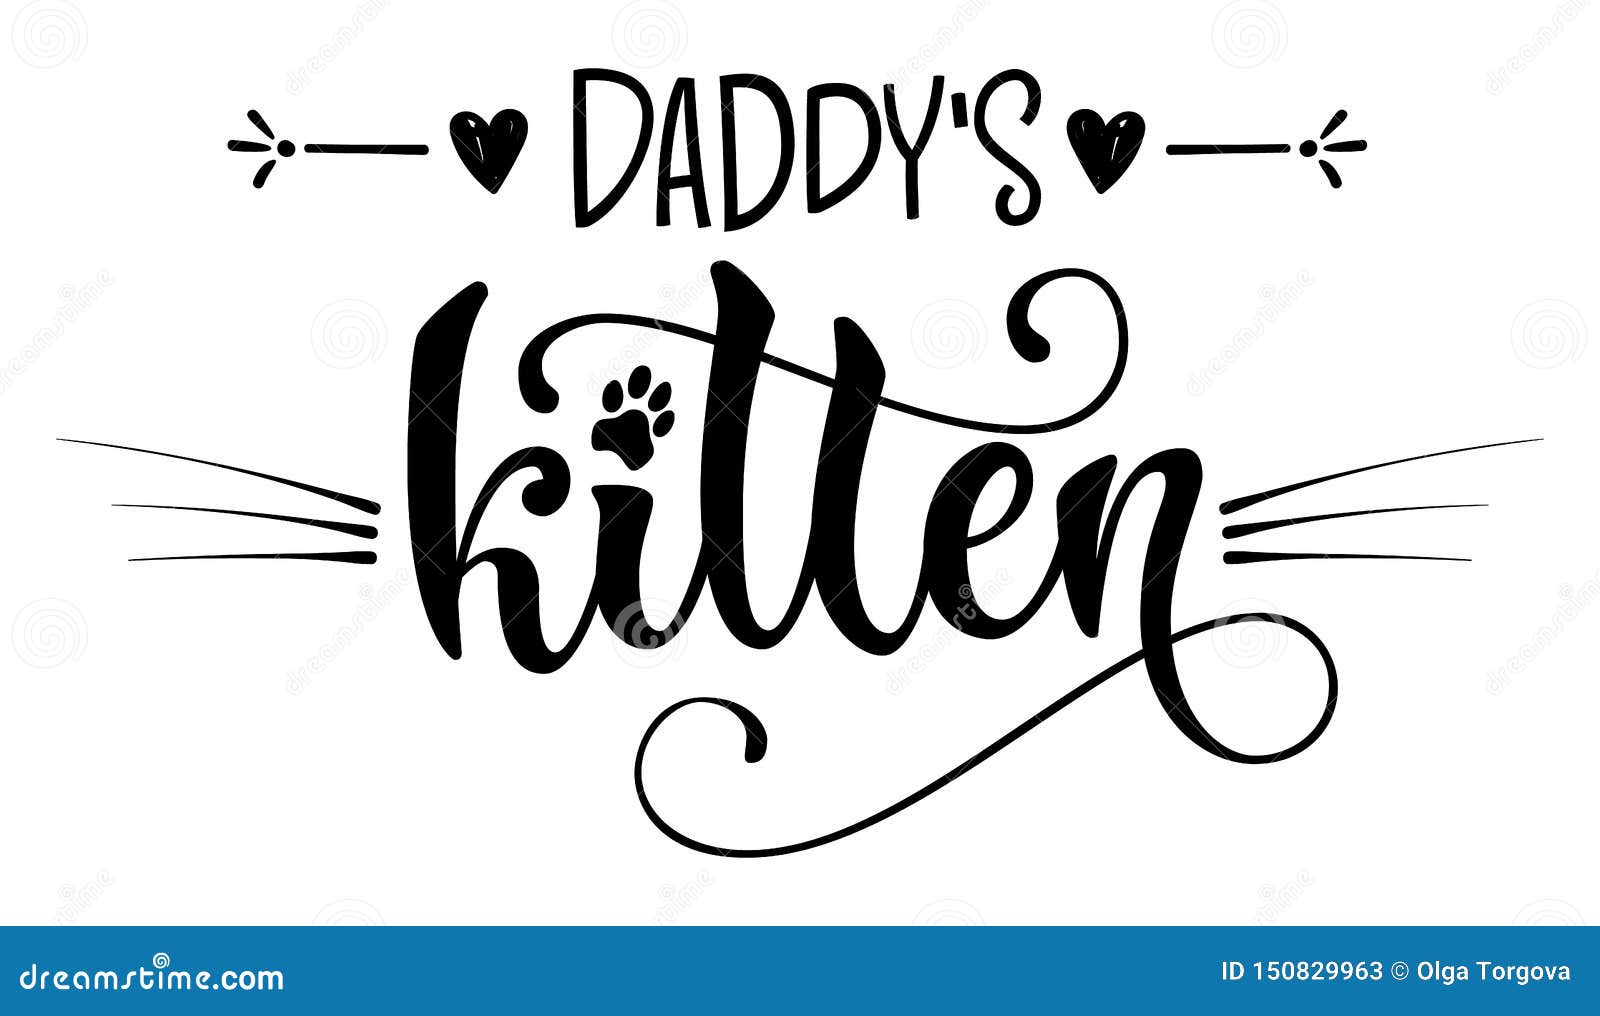 Kitten daddy and What is